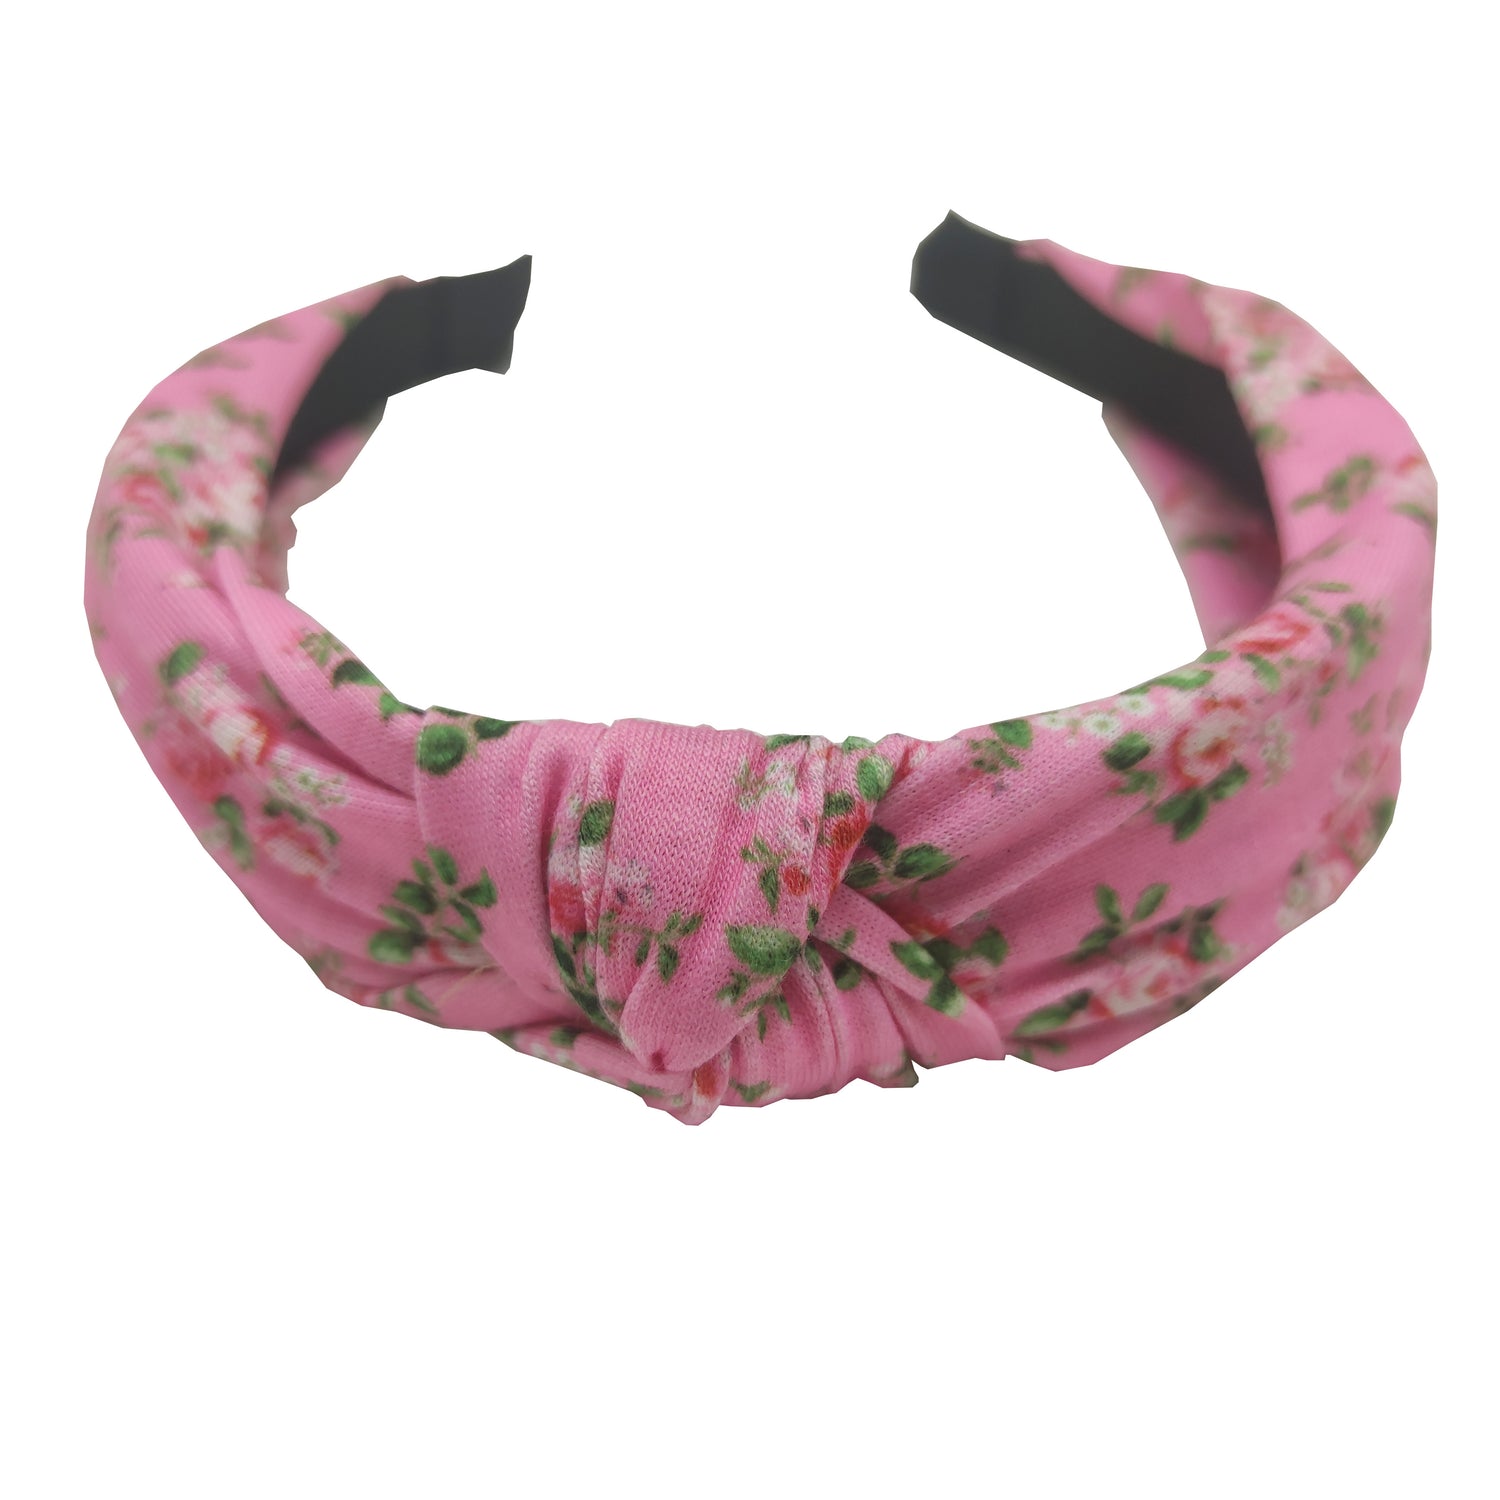 Sparkle Rose Knot Top Hairband - Pink